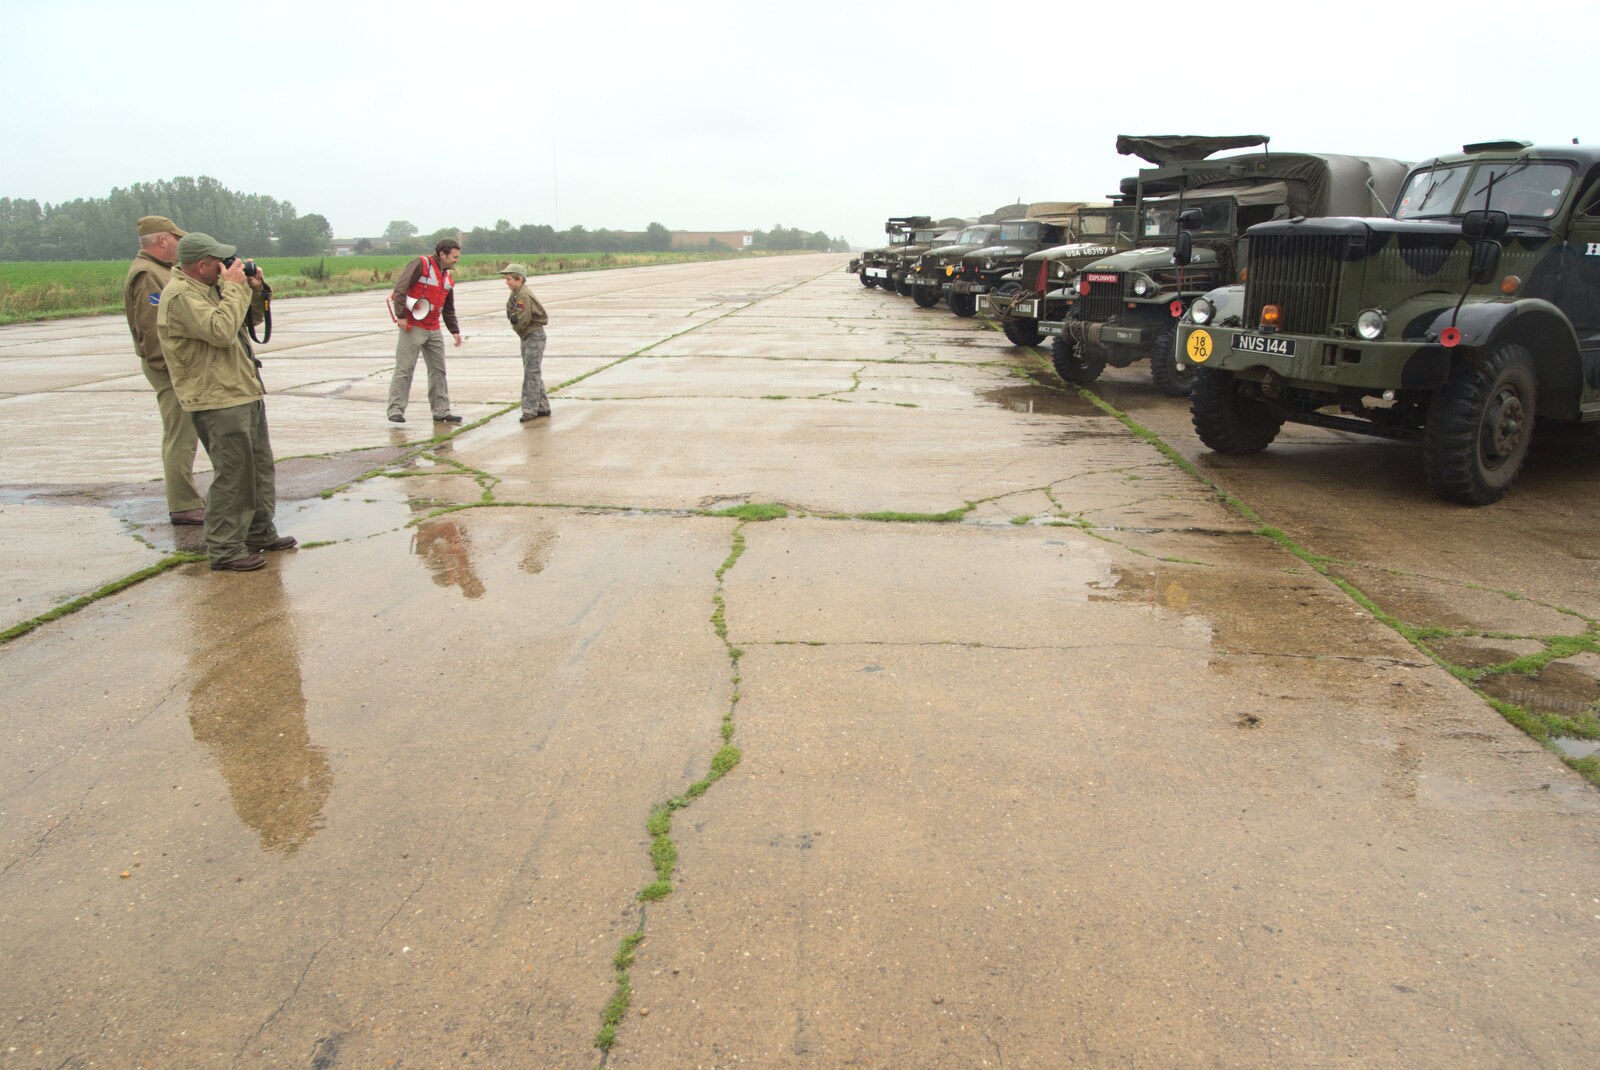 The wet runway from Clive's Military Vehicle Convoy, Brome Aerodrome, Suffolk - 16th July 2011